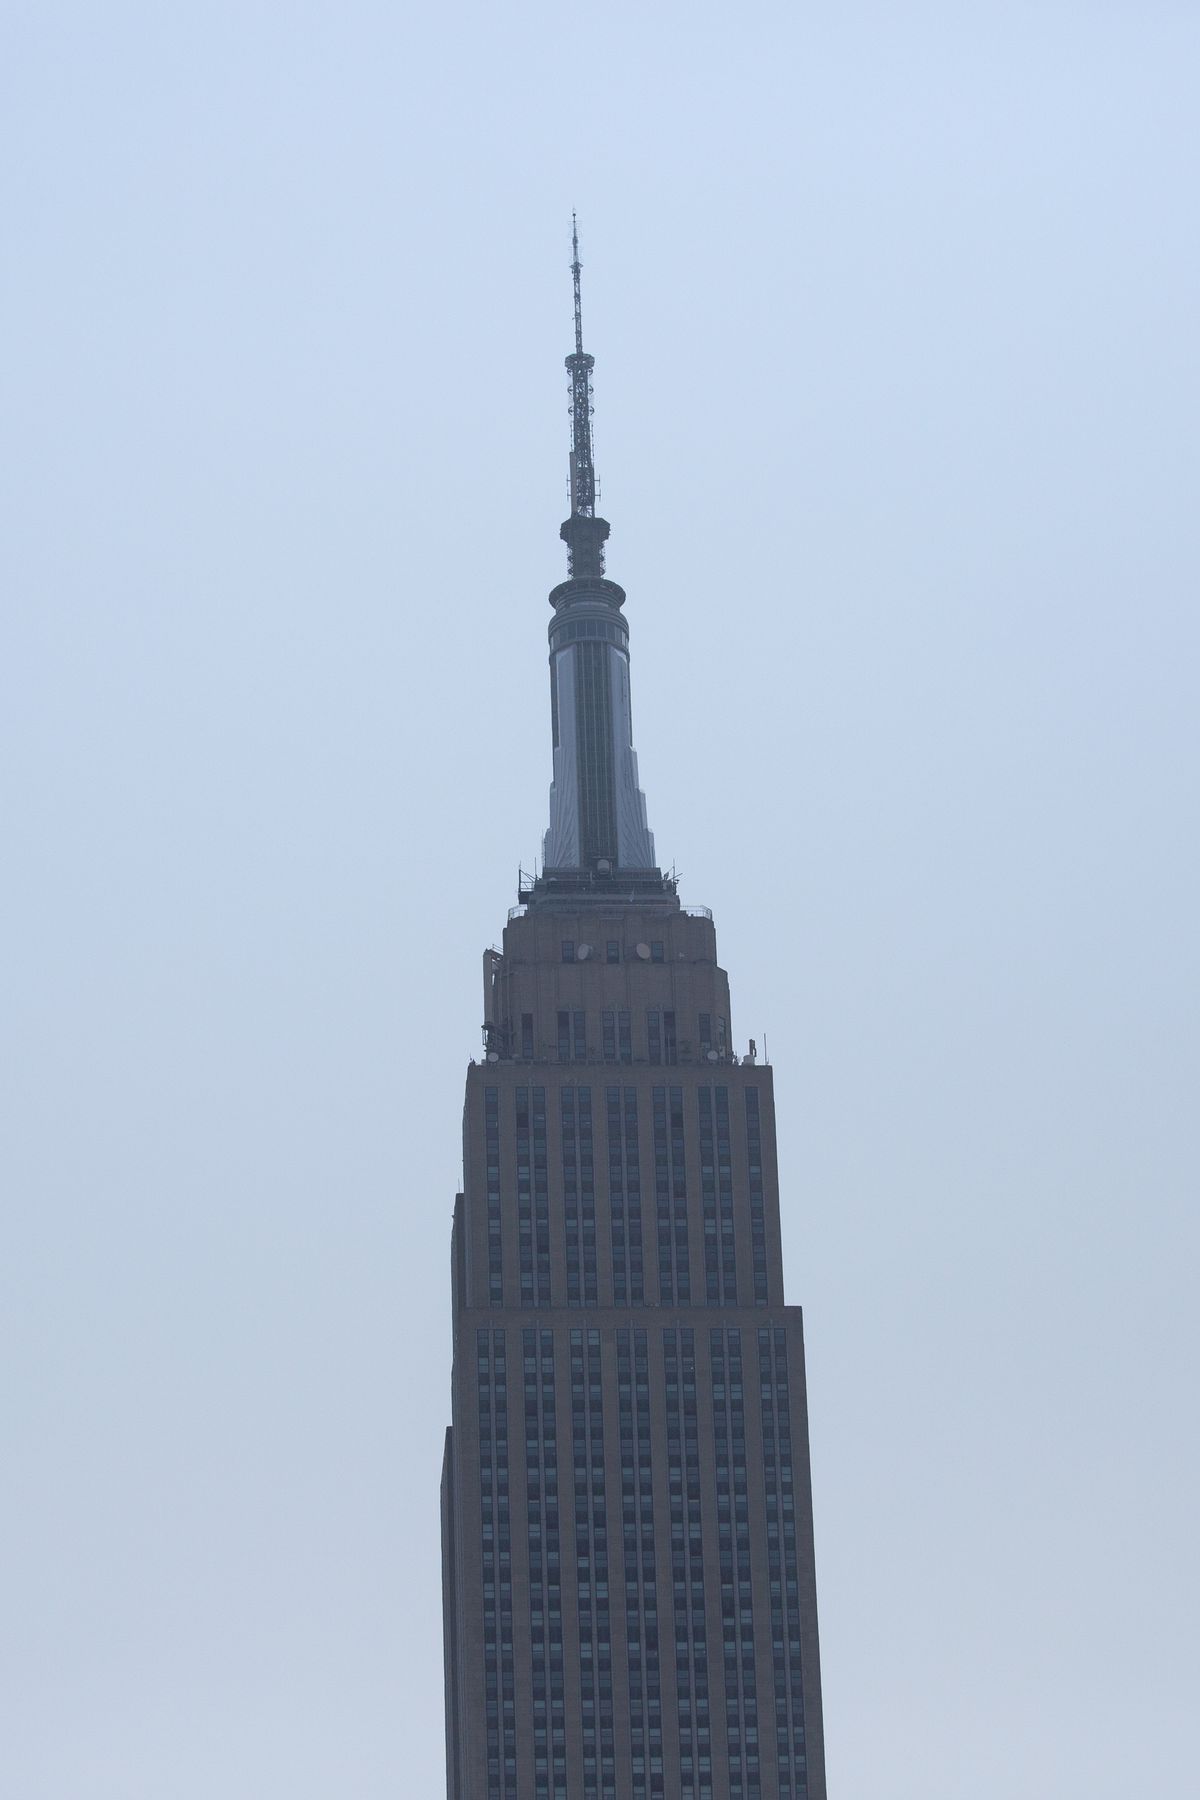 The Empire State building was blurred on a hot and hazy summer day, July 27, 2021.